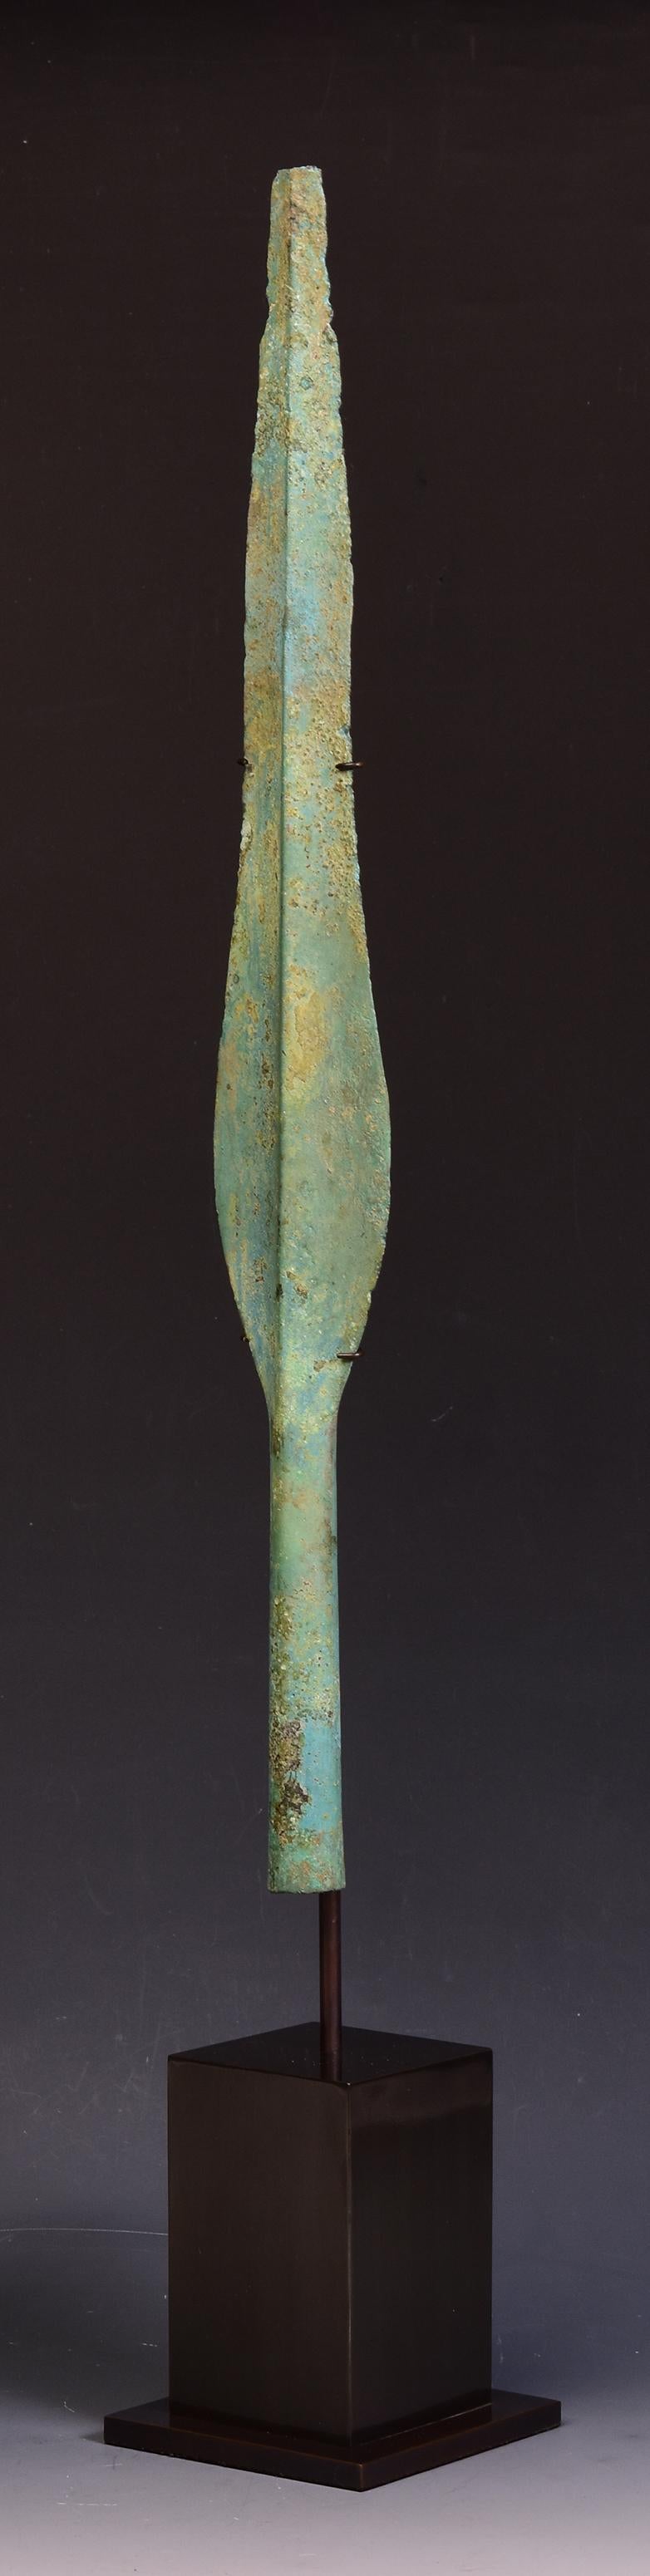 Ancient Antique Luristan Bronze Spear Early Iron Age Weapon For Sale 2